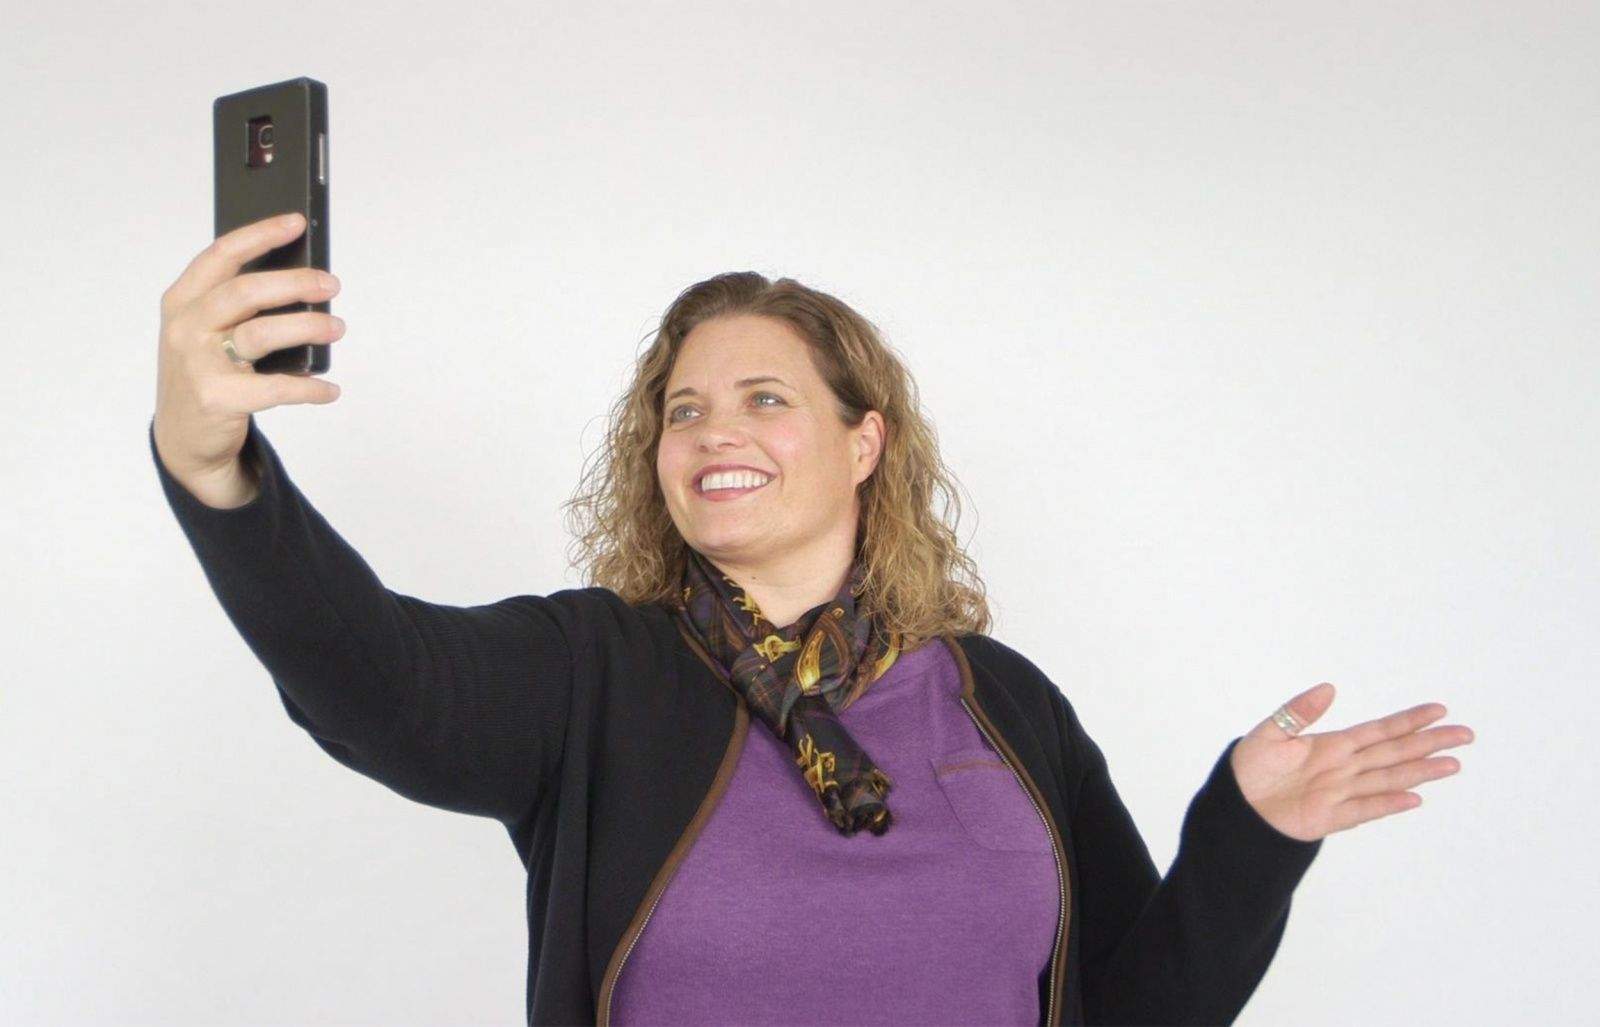 Elliptic Labs CEO Laila Danielsen shows how simple hand gestures can activate her smartphone's camera. Photo: Elliptic Labs